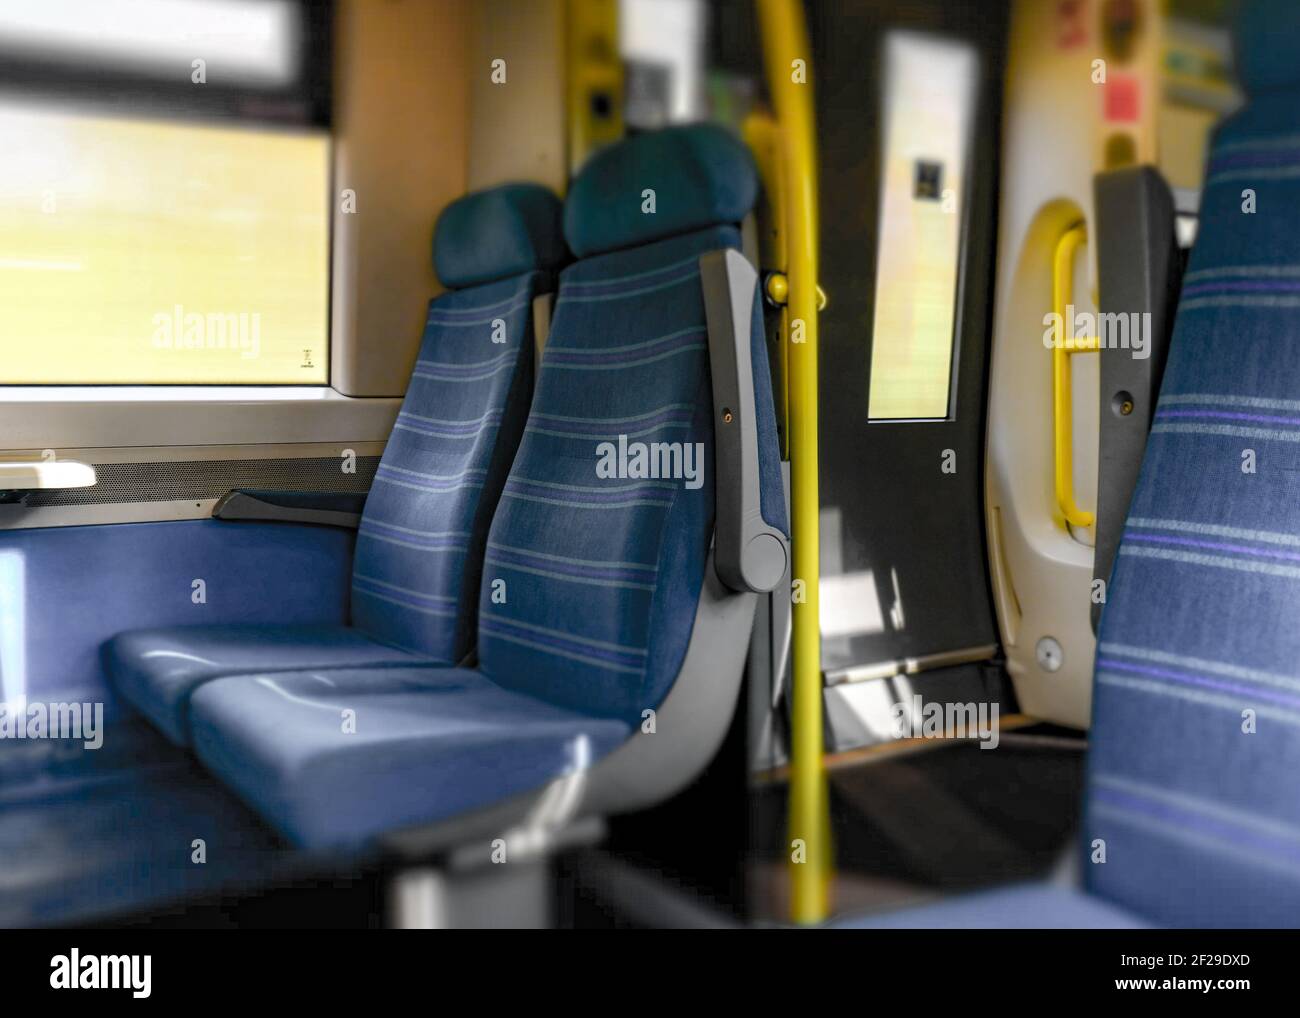 Dorking, UK- March 2021: Interior of train Southern Rail train carriage with empty seats Stock Photo